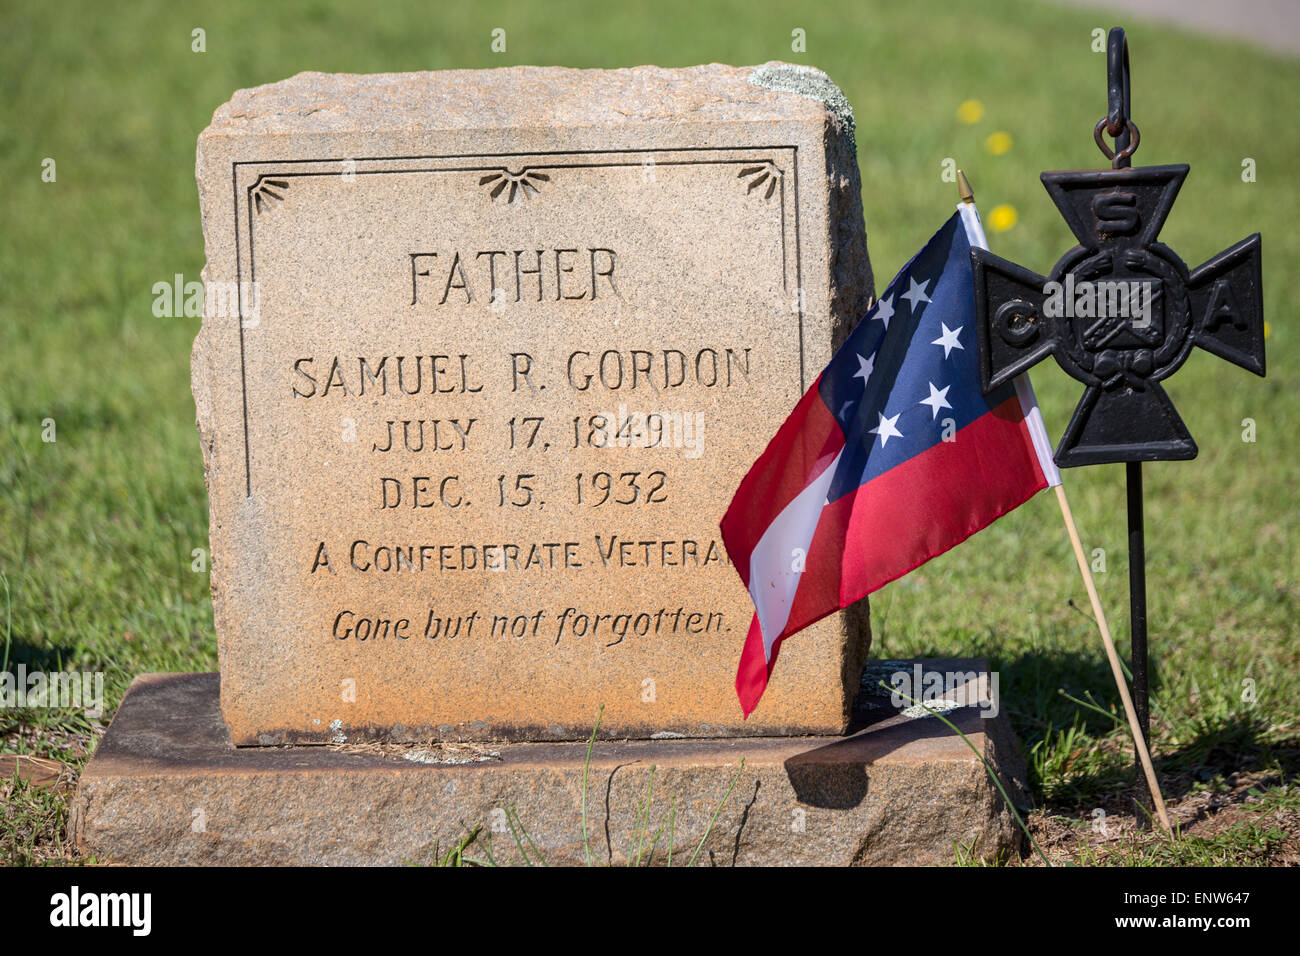 The grave marker of a civil war confederate veteran at Elmwood Cemetery decorated with a flag on Confederate Memorial Day May 2, 2015 in Columbia, SC. Confederate Memorial Day is an official state holiday in South Carolina and honors those that served during the Civil War. Stock Photo